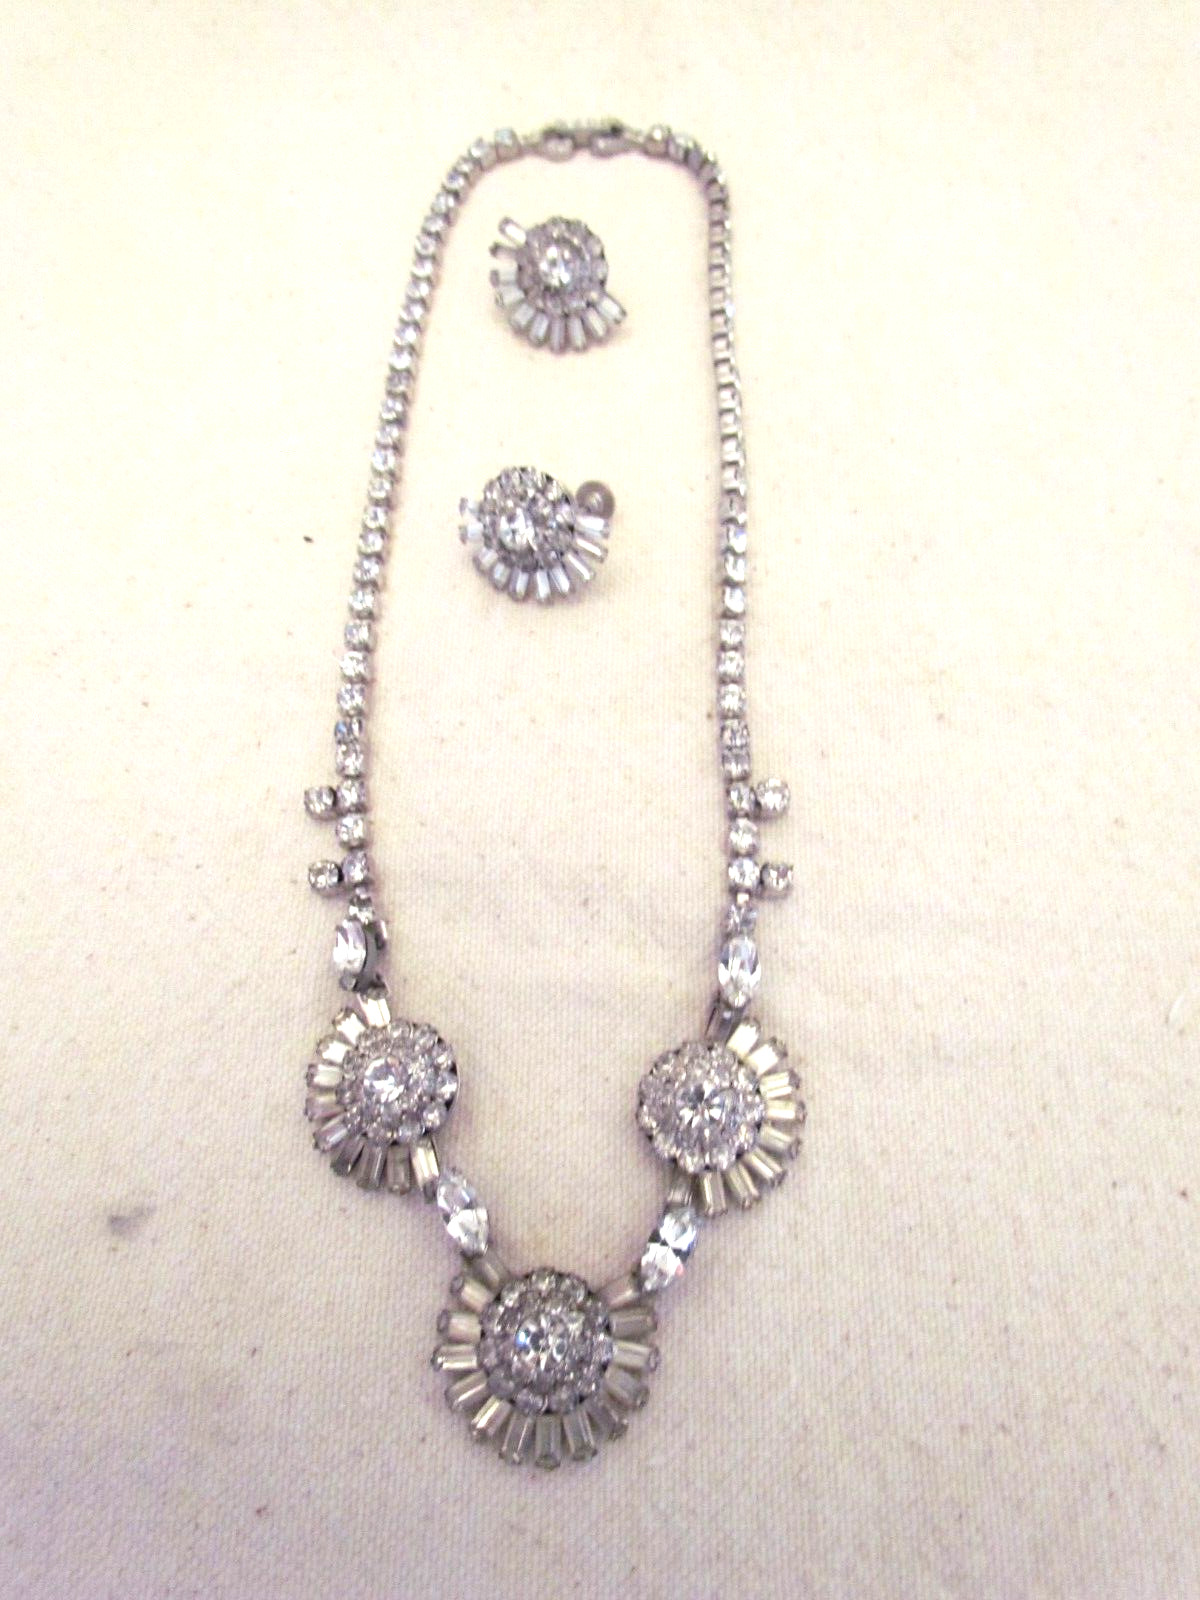 Signed Parco Rhinestone Necklace and Earrings - image 1